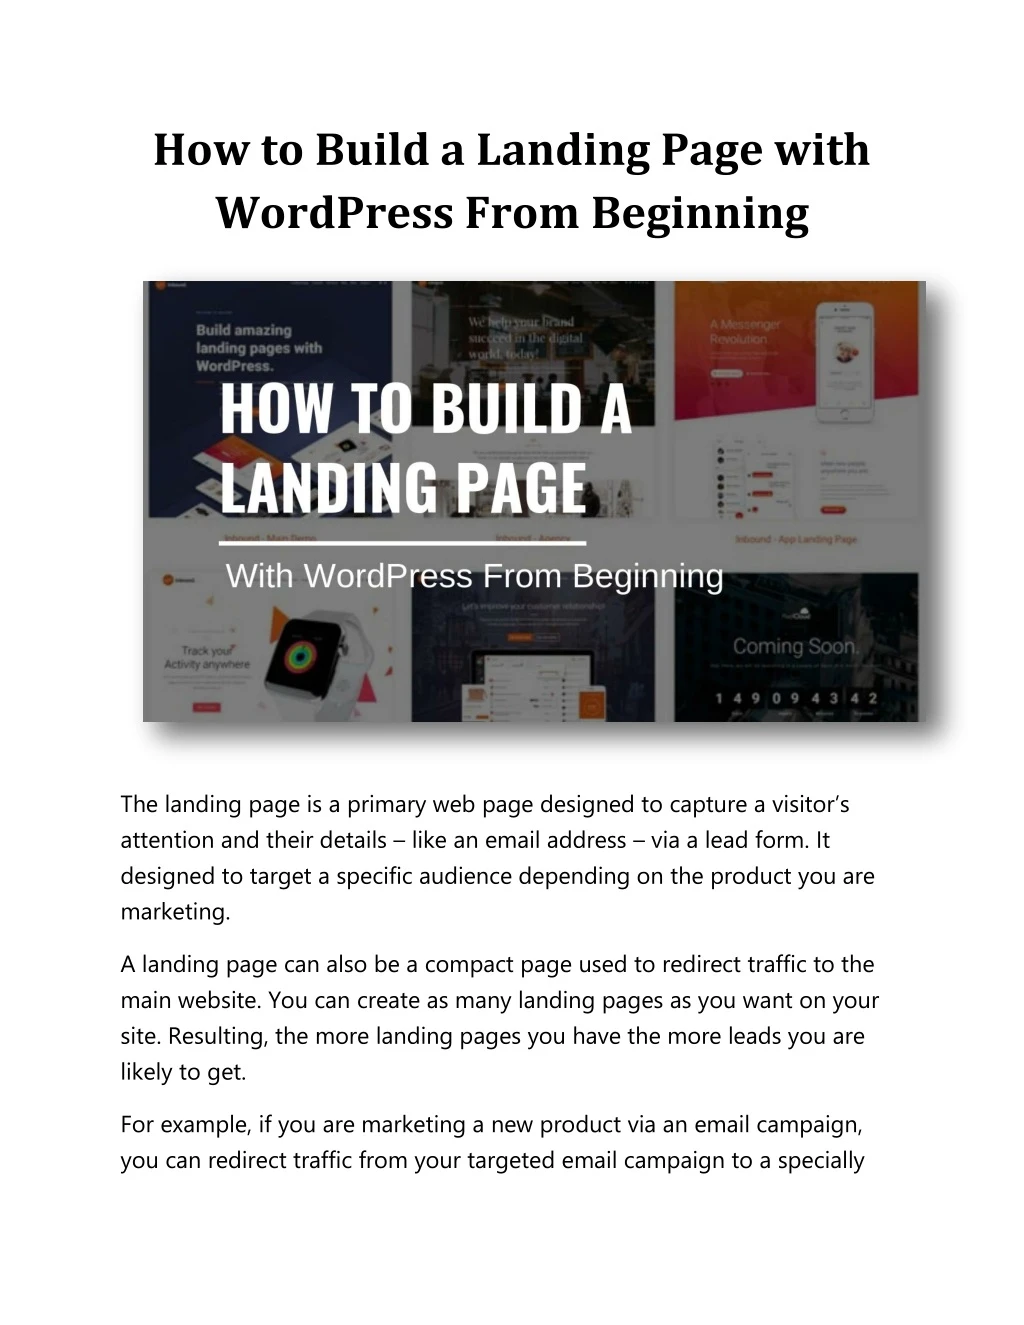 how to build a landing page with wordpress from